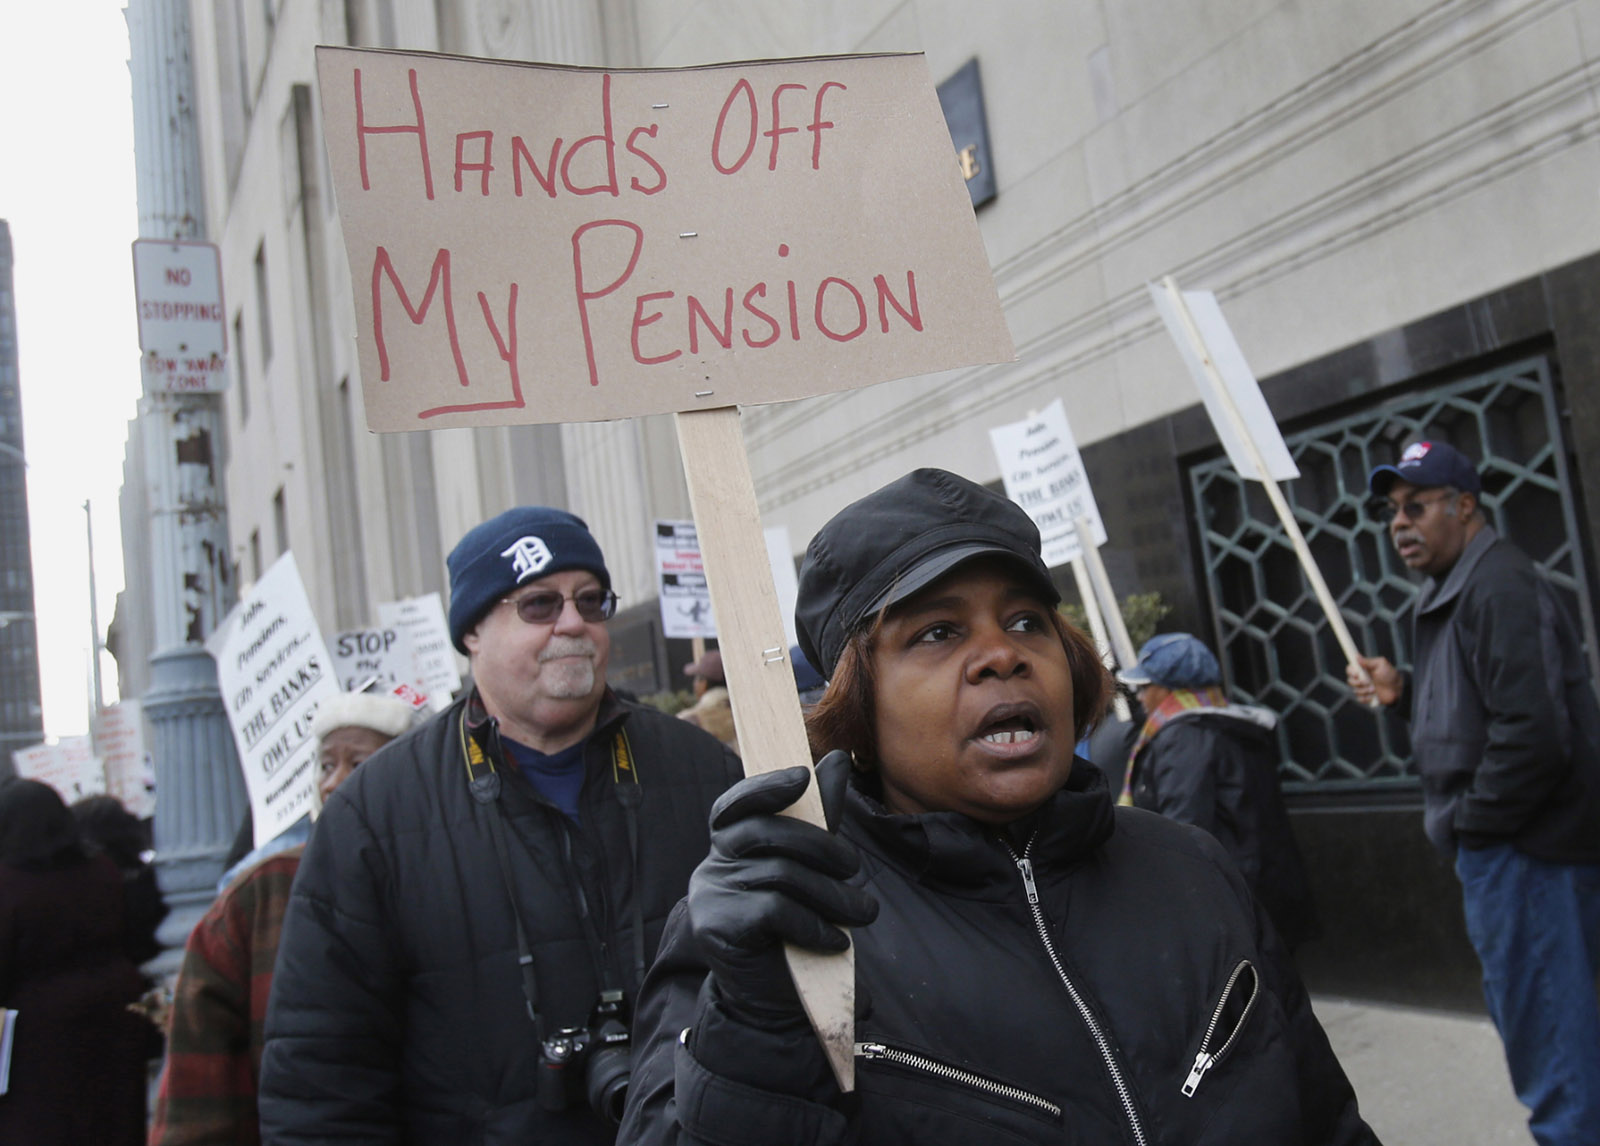 Retired municipal worker Debora Pickett and others at a protest against proposed cuts to the pensions and health benefits of Detroit’s employees